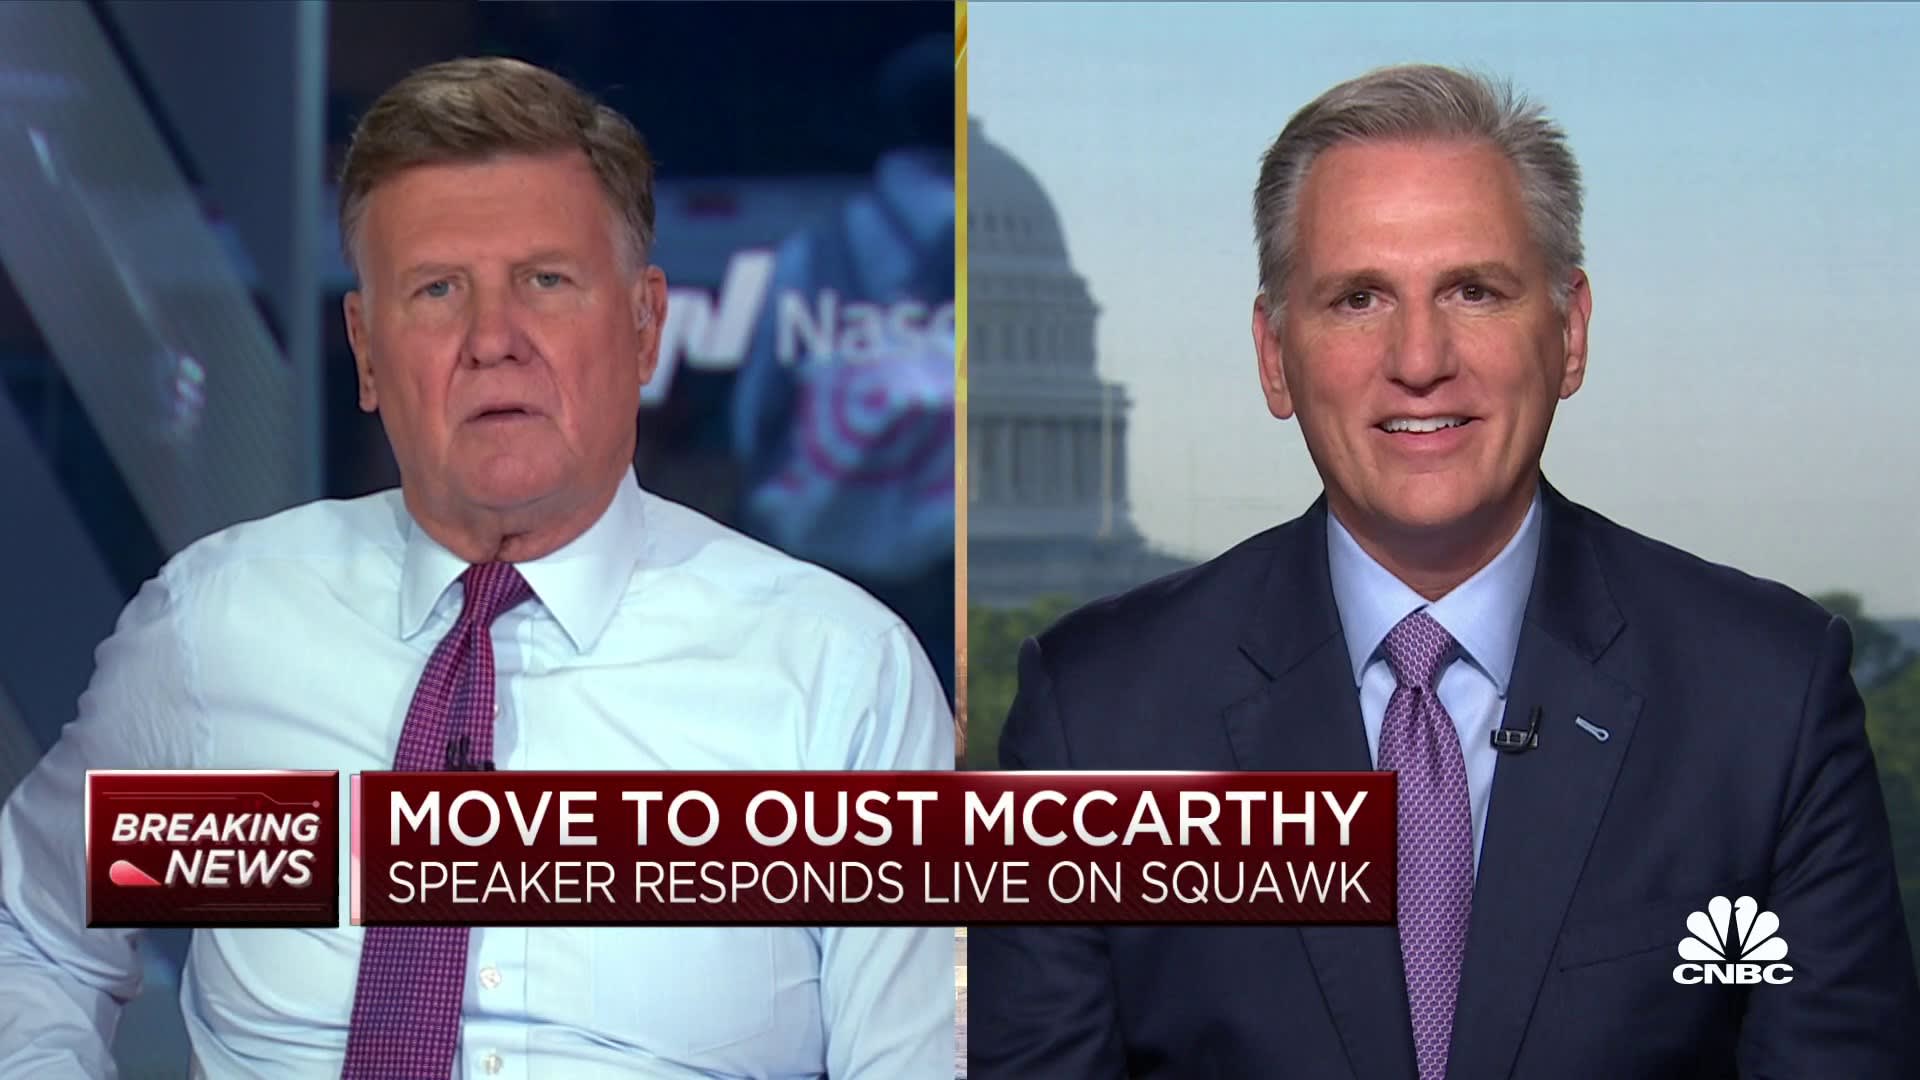 House Speaker McCarthy: Matt Gaetz has 'personal things in his life that he has challenges with'